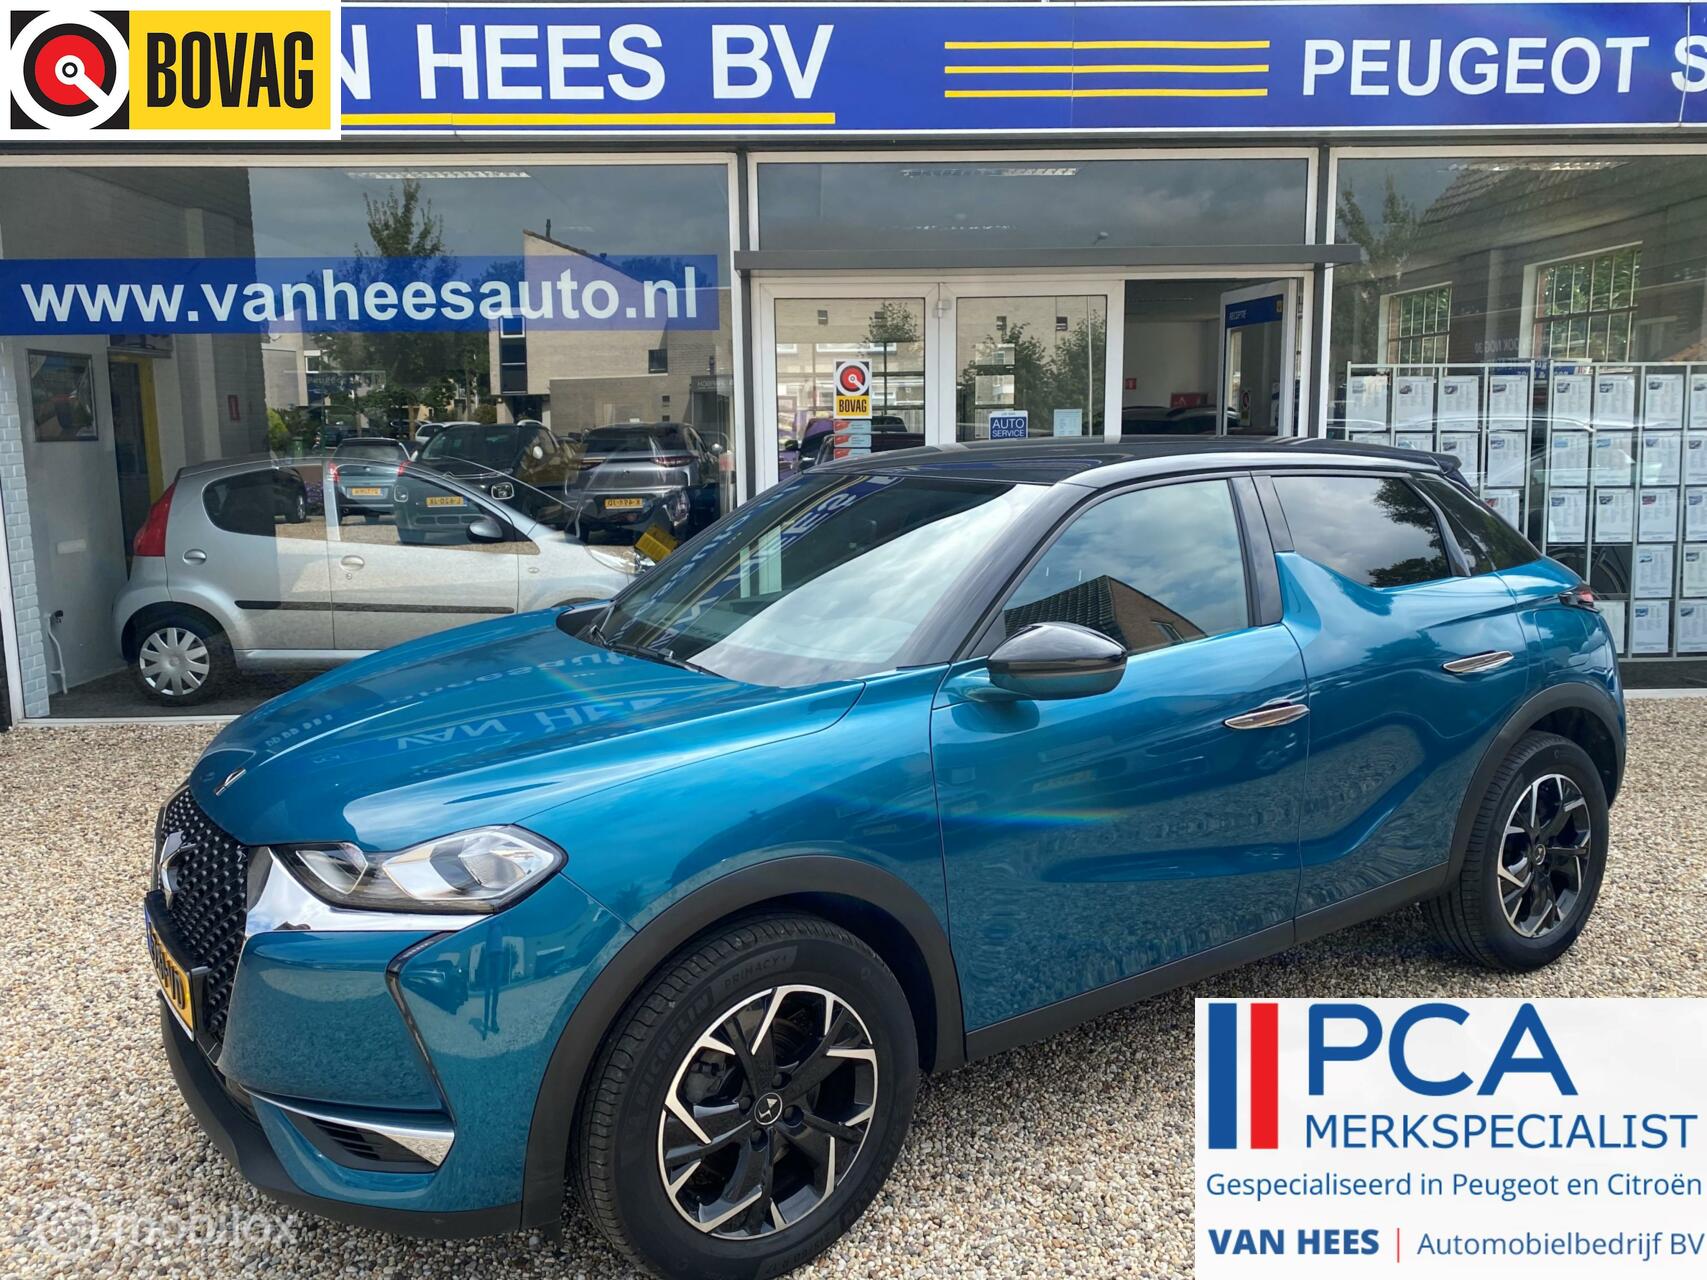 Ds 3 Crossback 1.2 PureTech So Chic 130 THP EAT8 automaat PDC v + a bij viaBOVAG.nl